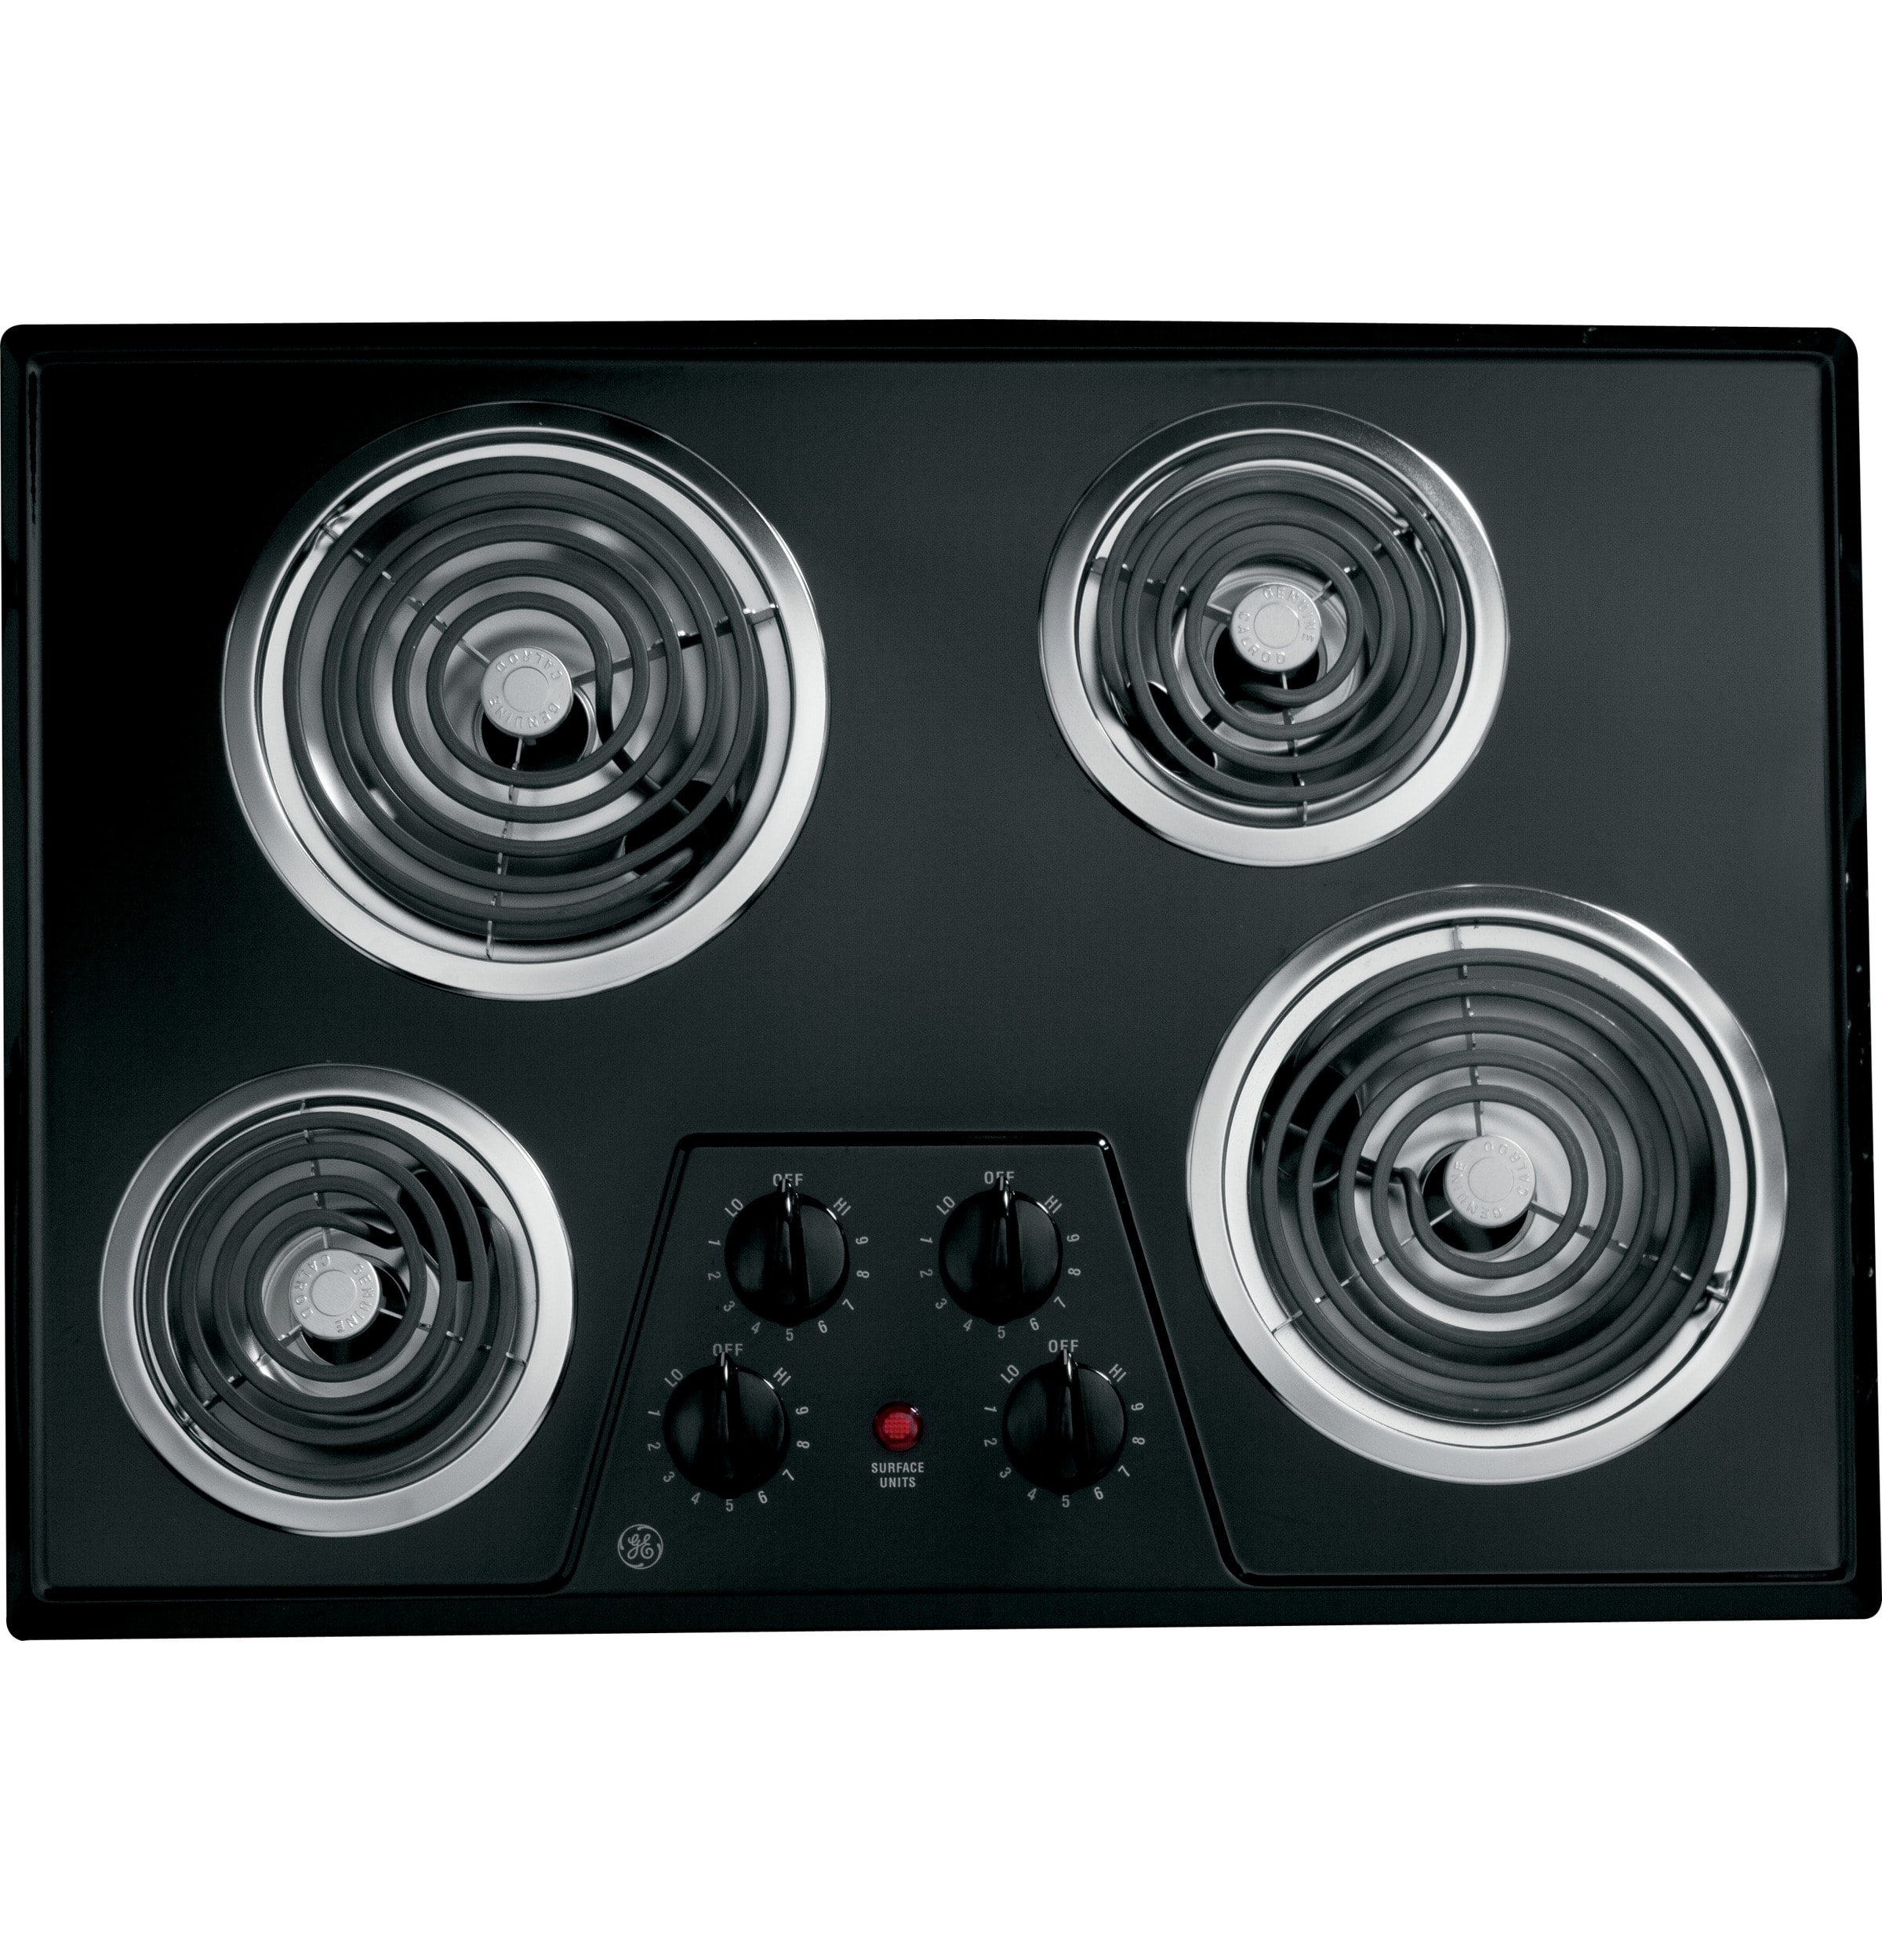 GE 30 Inch Electric 4 Burner Coil White Cooktop 888022 – APPLIANCE